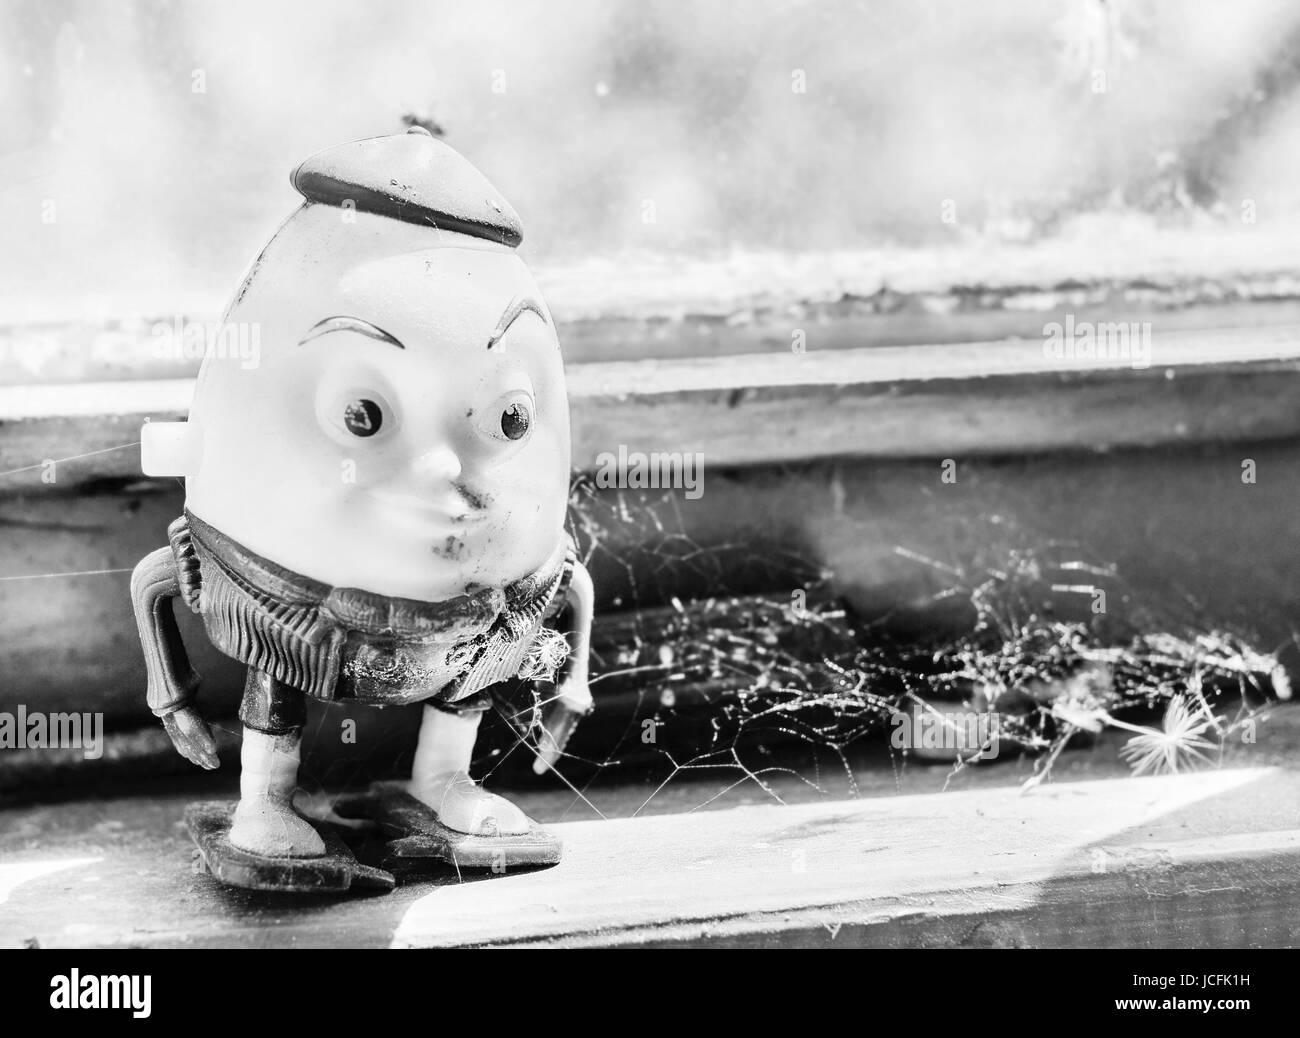 Humpty Dumpty toy old for editorial pictures in black and white Stock Photo